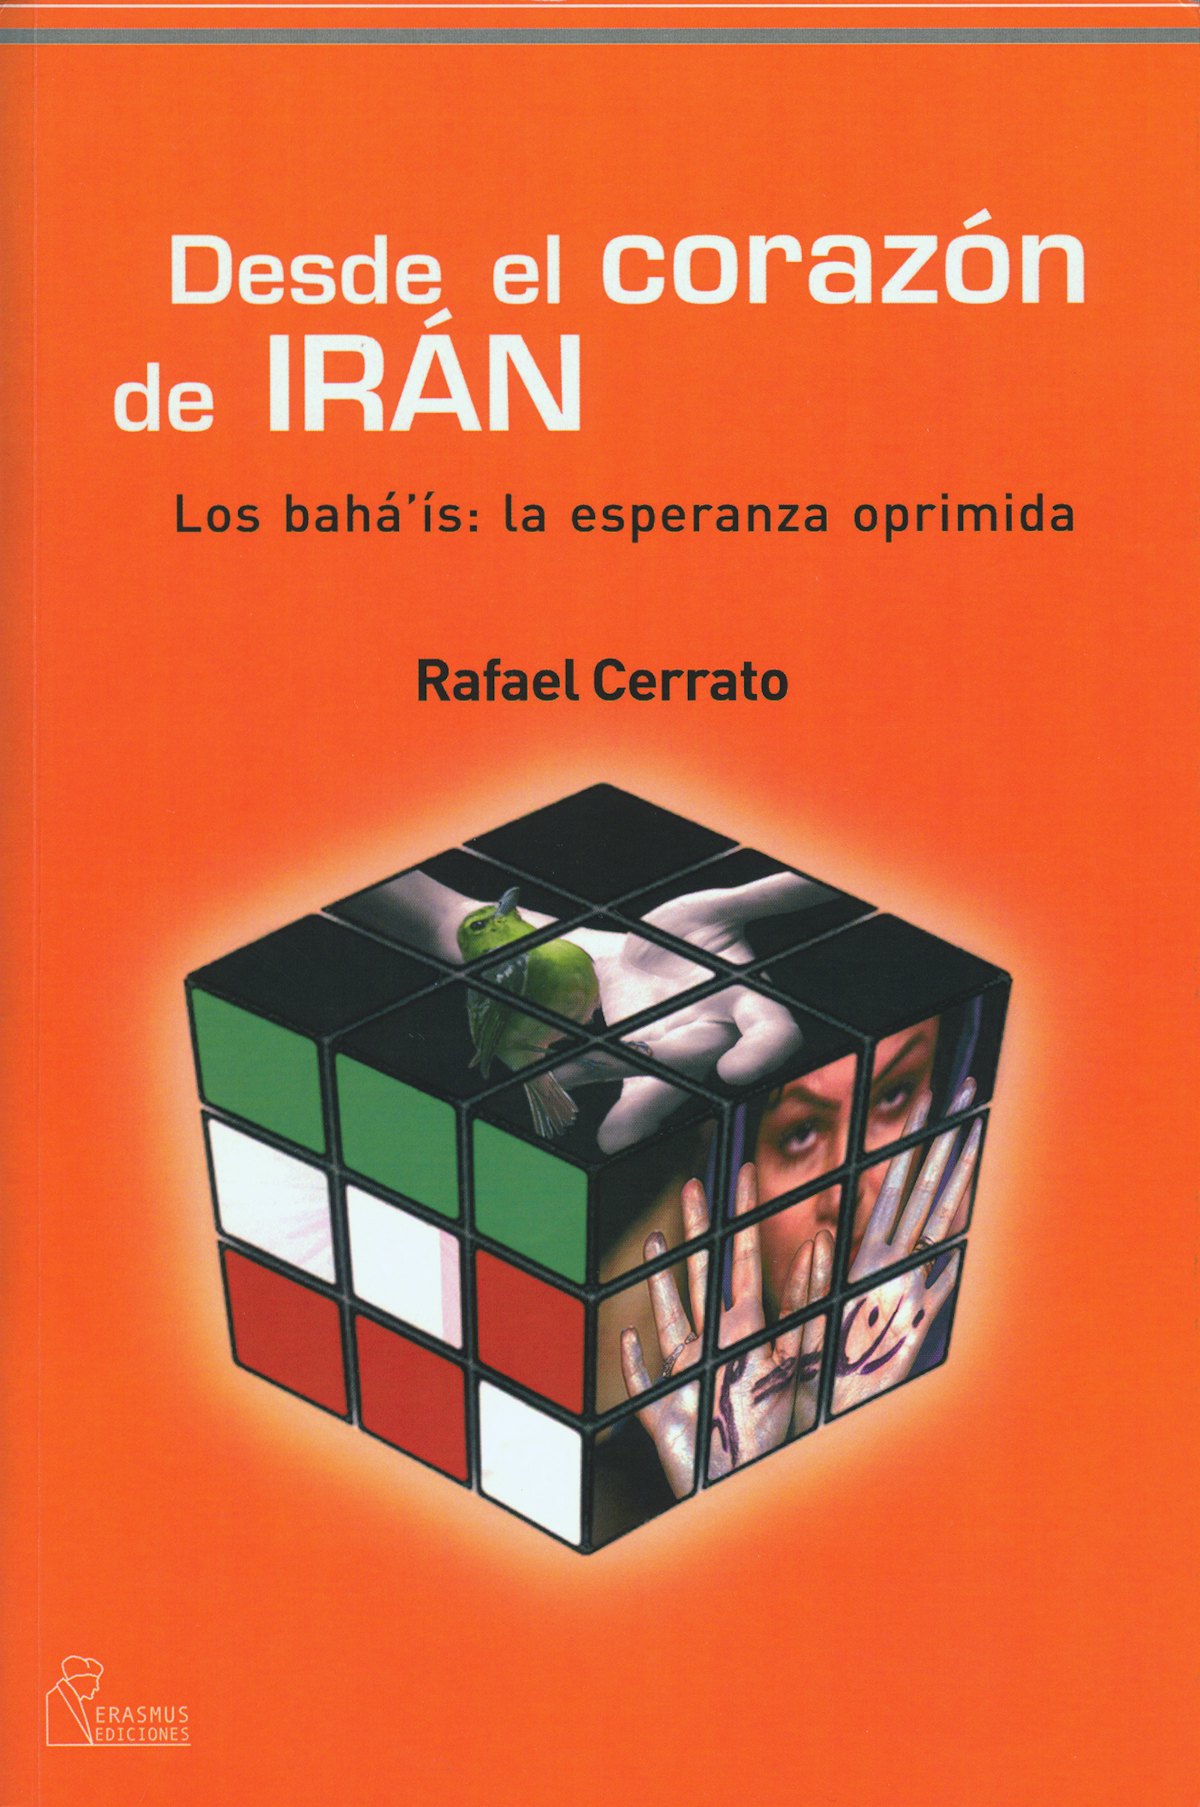 "Desde el corazon de Iran - Los baha'is: La esperanza oprimida" is one of the first major works written in Spanish about the genesis and persecution of the Baha'i community in Iran.